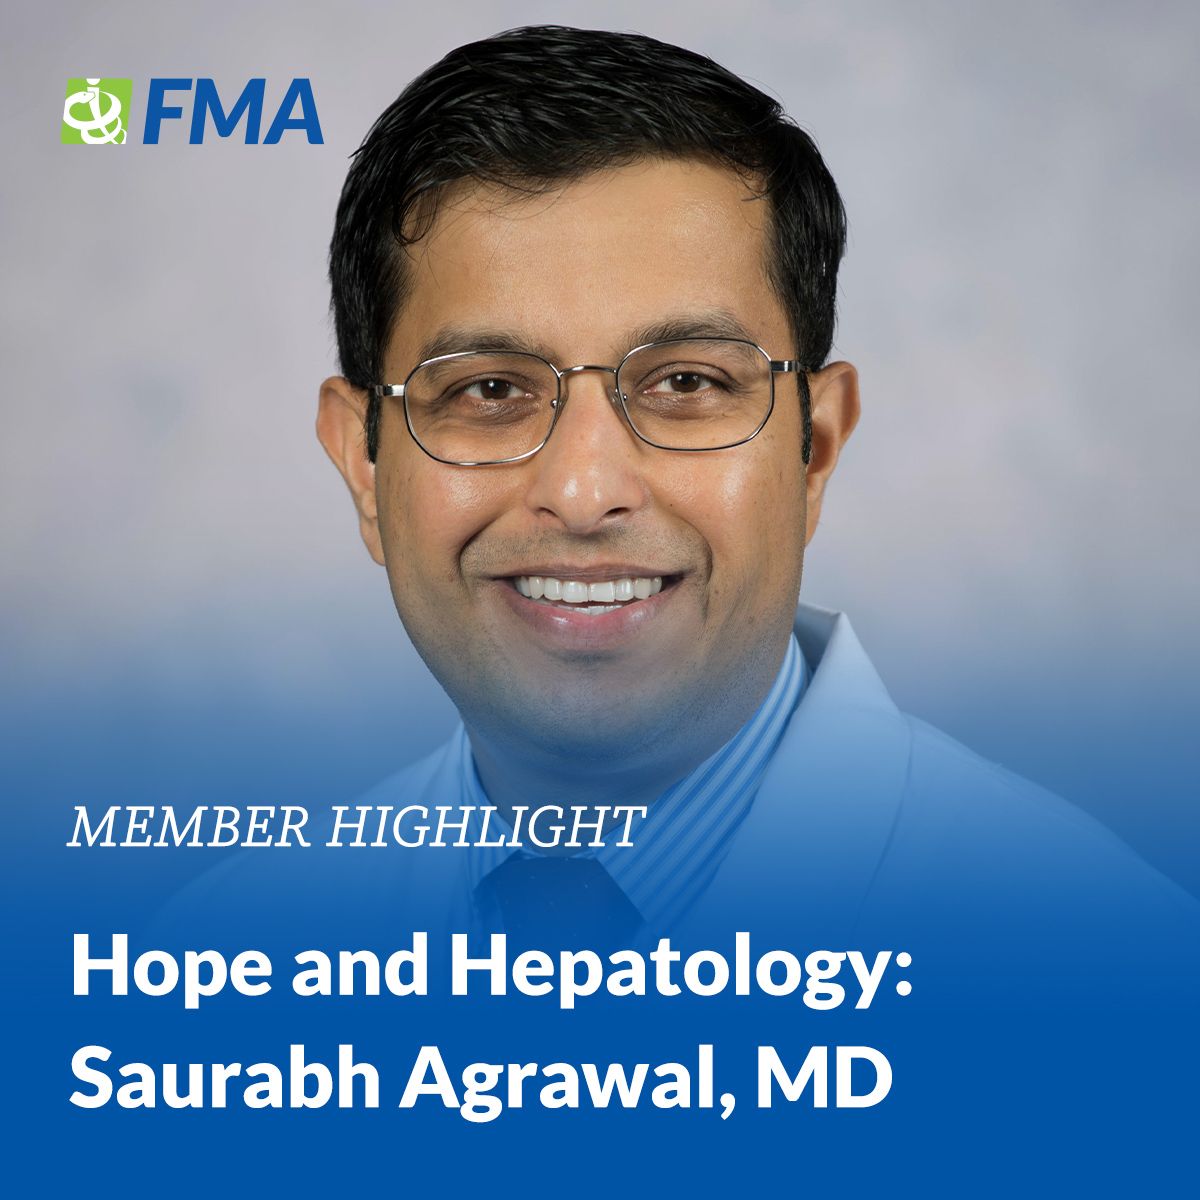 A member of the FMA's Physician Leadership Academy class & Medical Director of Tampa General Hospital’s (TGH) HPB & Liver Tumor Program, Saurabh Agrawal, MD's decision to specialize in liver transplant hepatology was one of hope for patients: buff.ly/3VNE6Ul